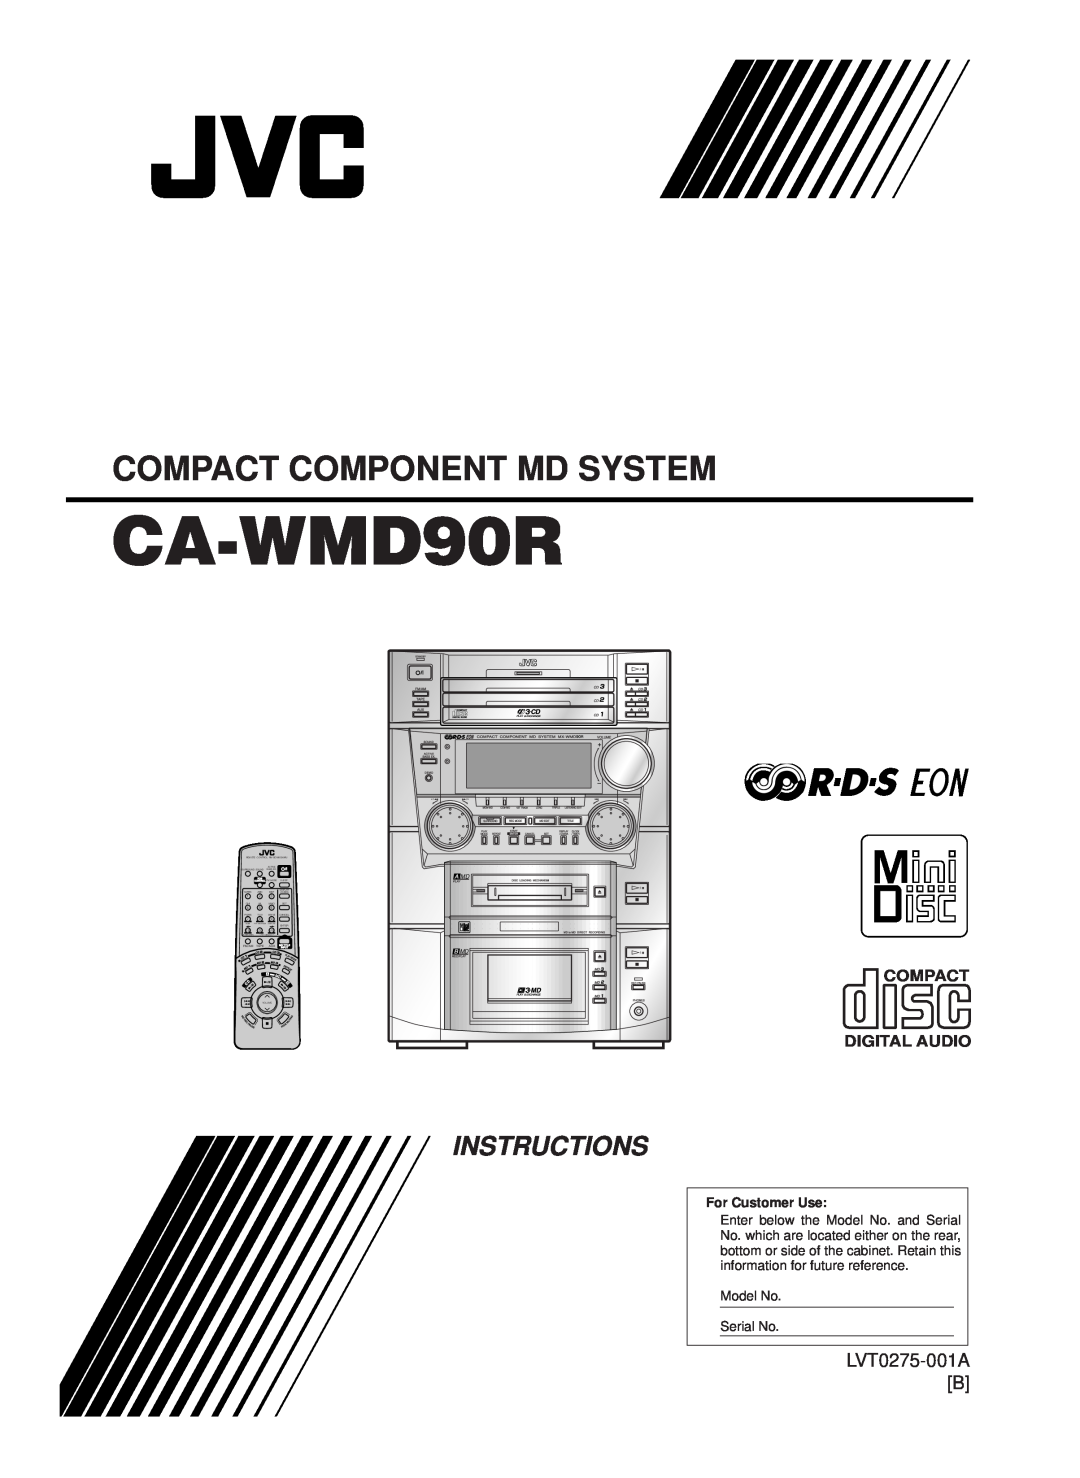 JVC CA-WMD90R manual Compact Component Md System, Instructions, LVT0275-001AB, Compact Digital Audio, For Customer Use 